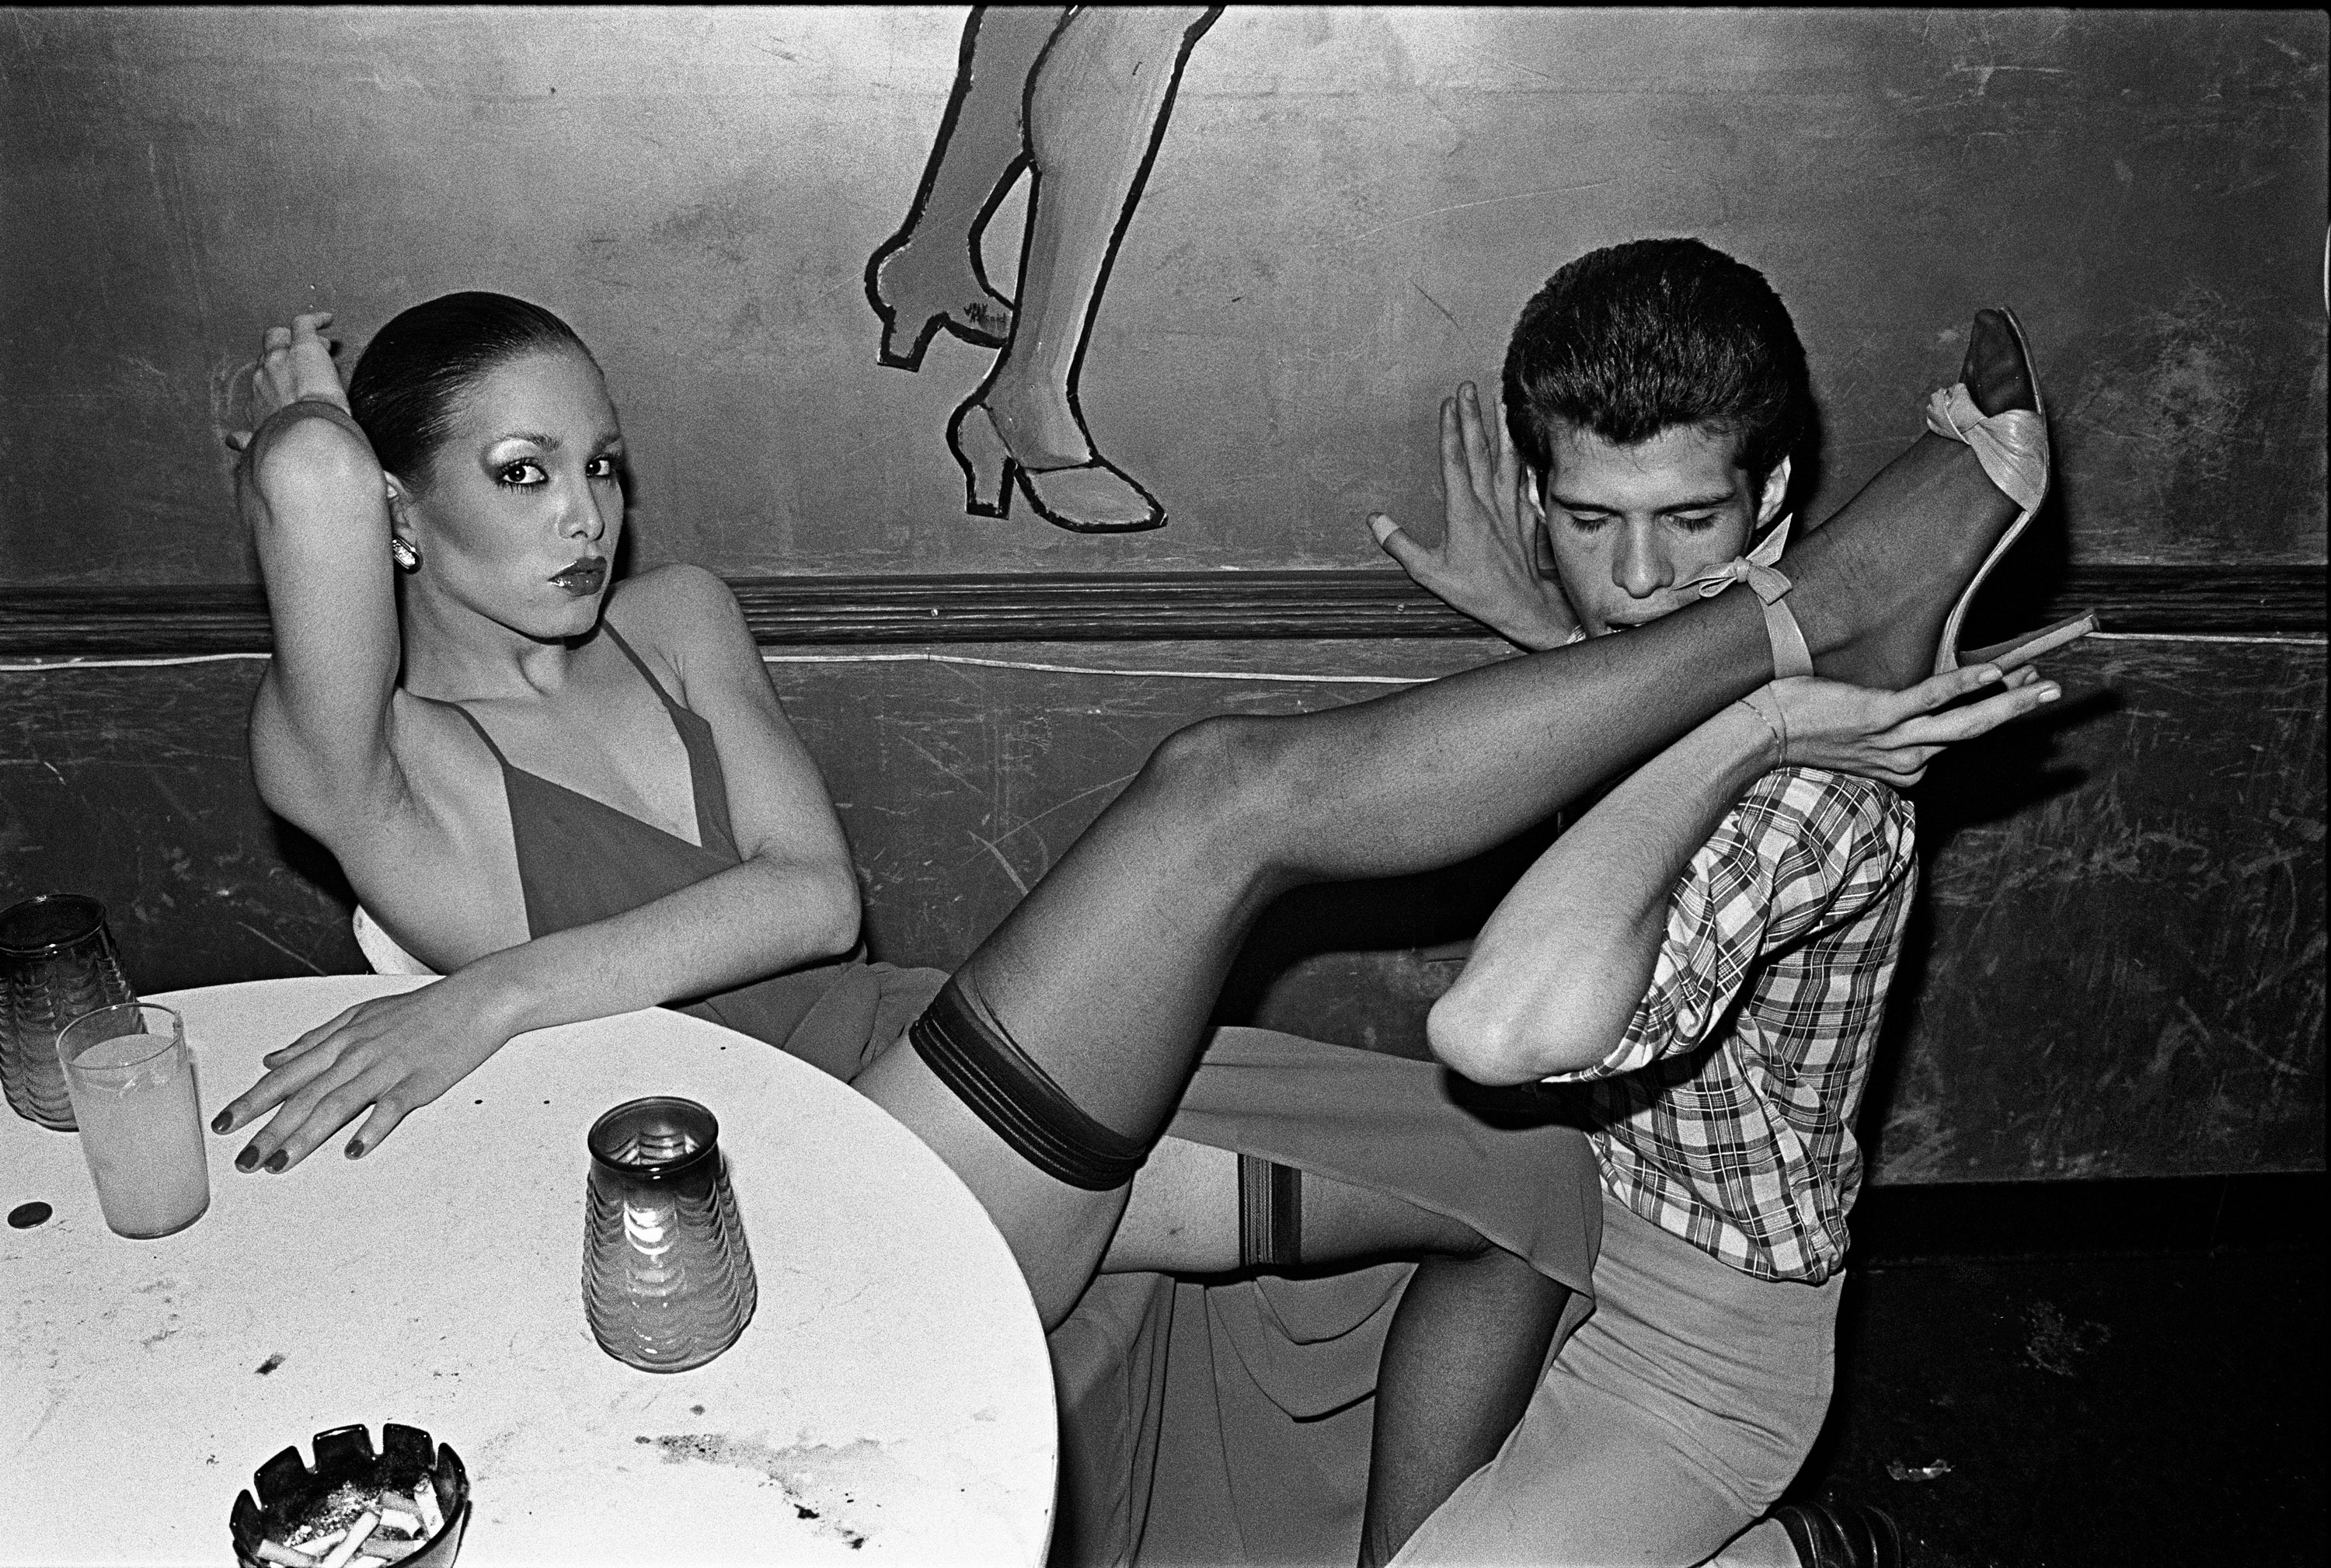 Pictures from the New York Disco scene (1979-1980) by Bill Berstein.